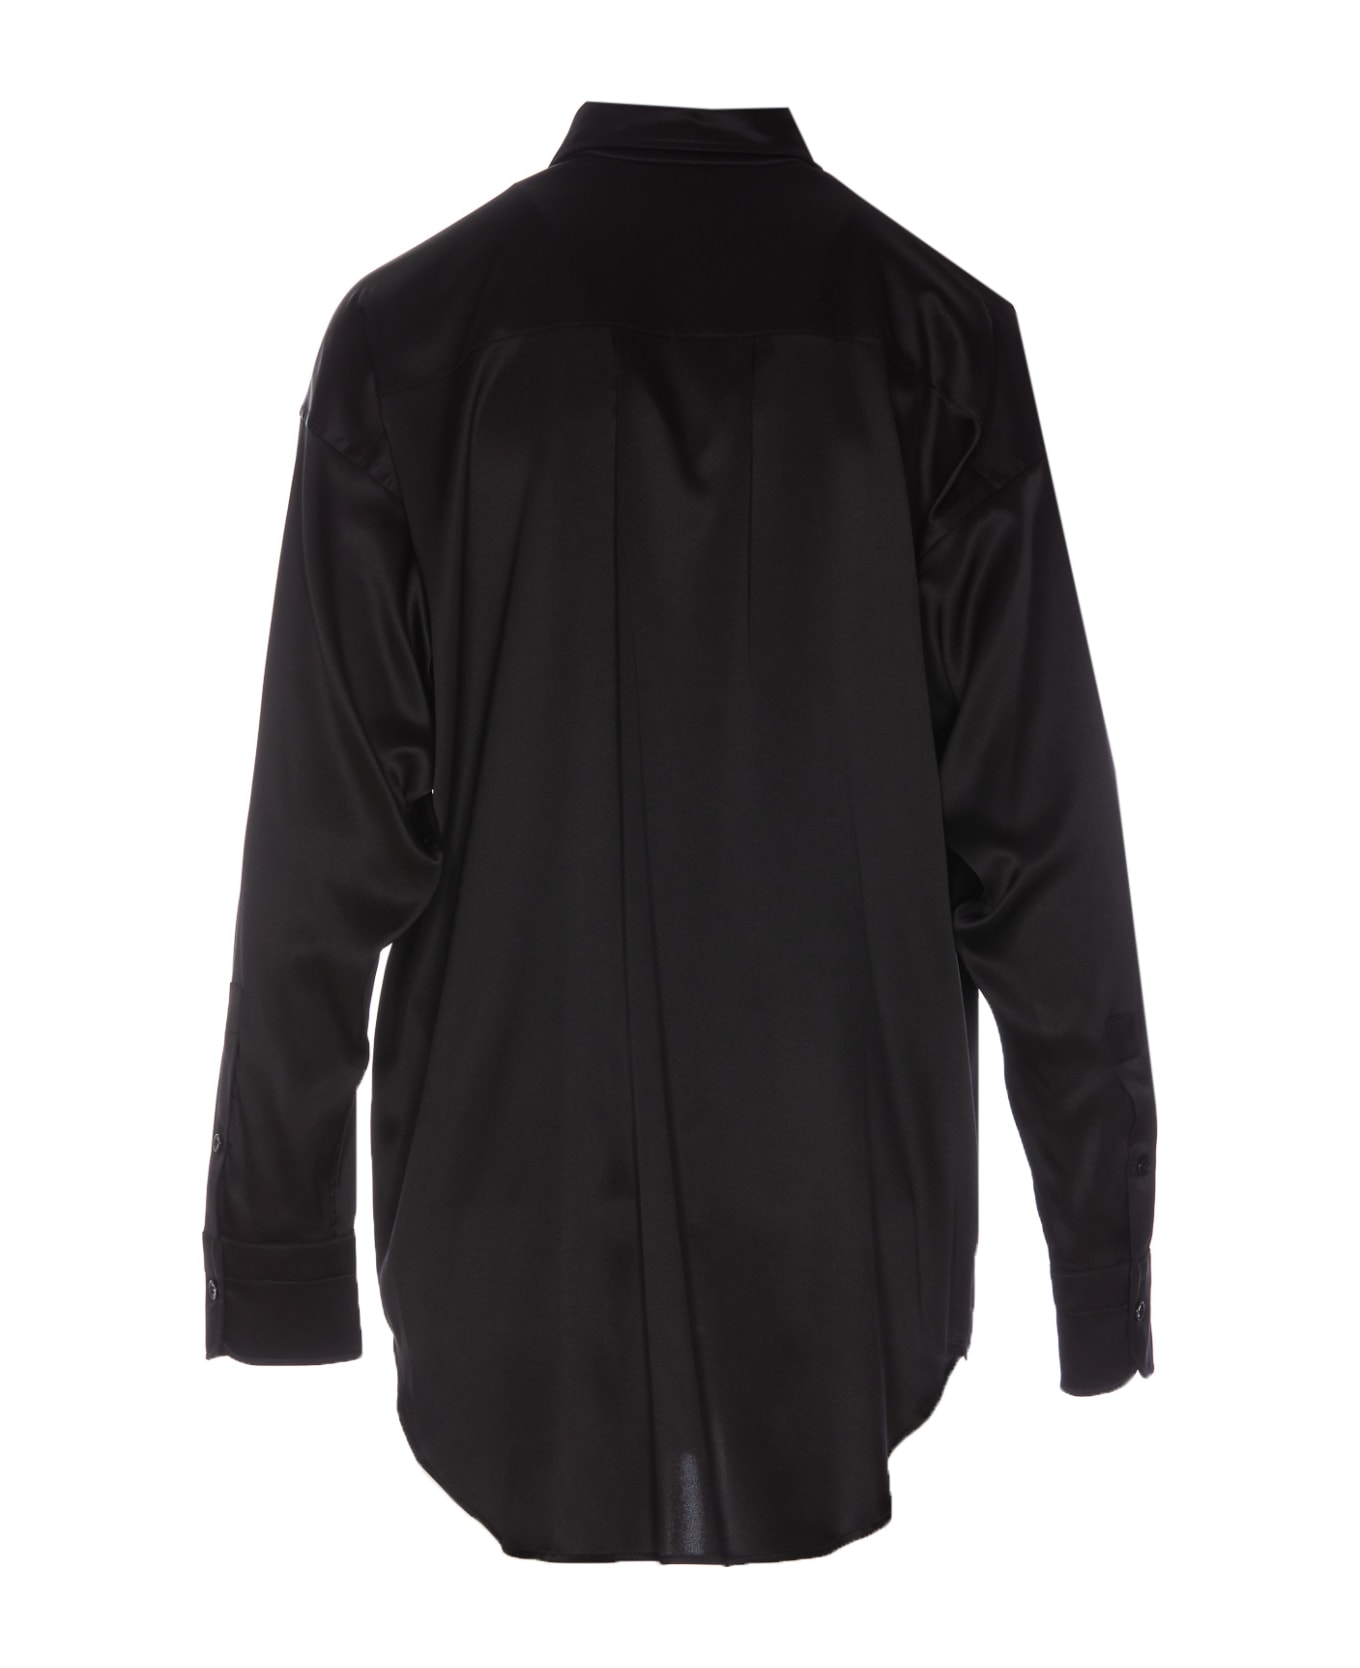 Tom Ford Stretch Silk Satin Relaxed Fit Shirt - Black シャツ